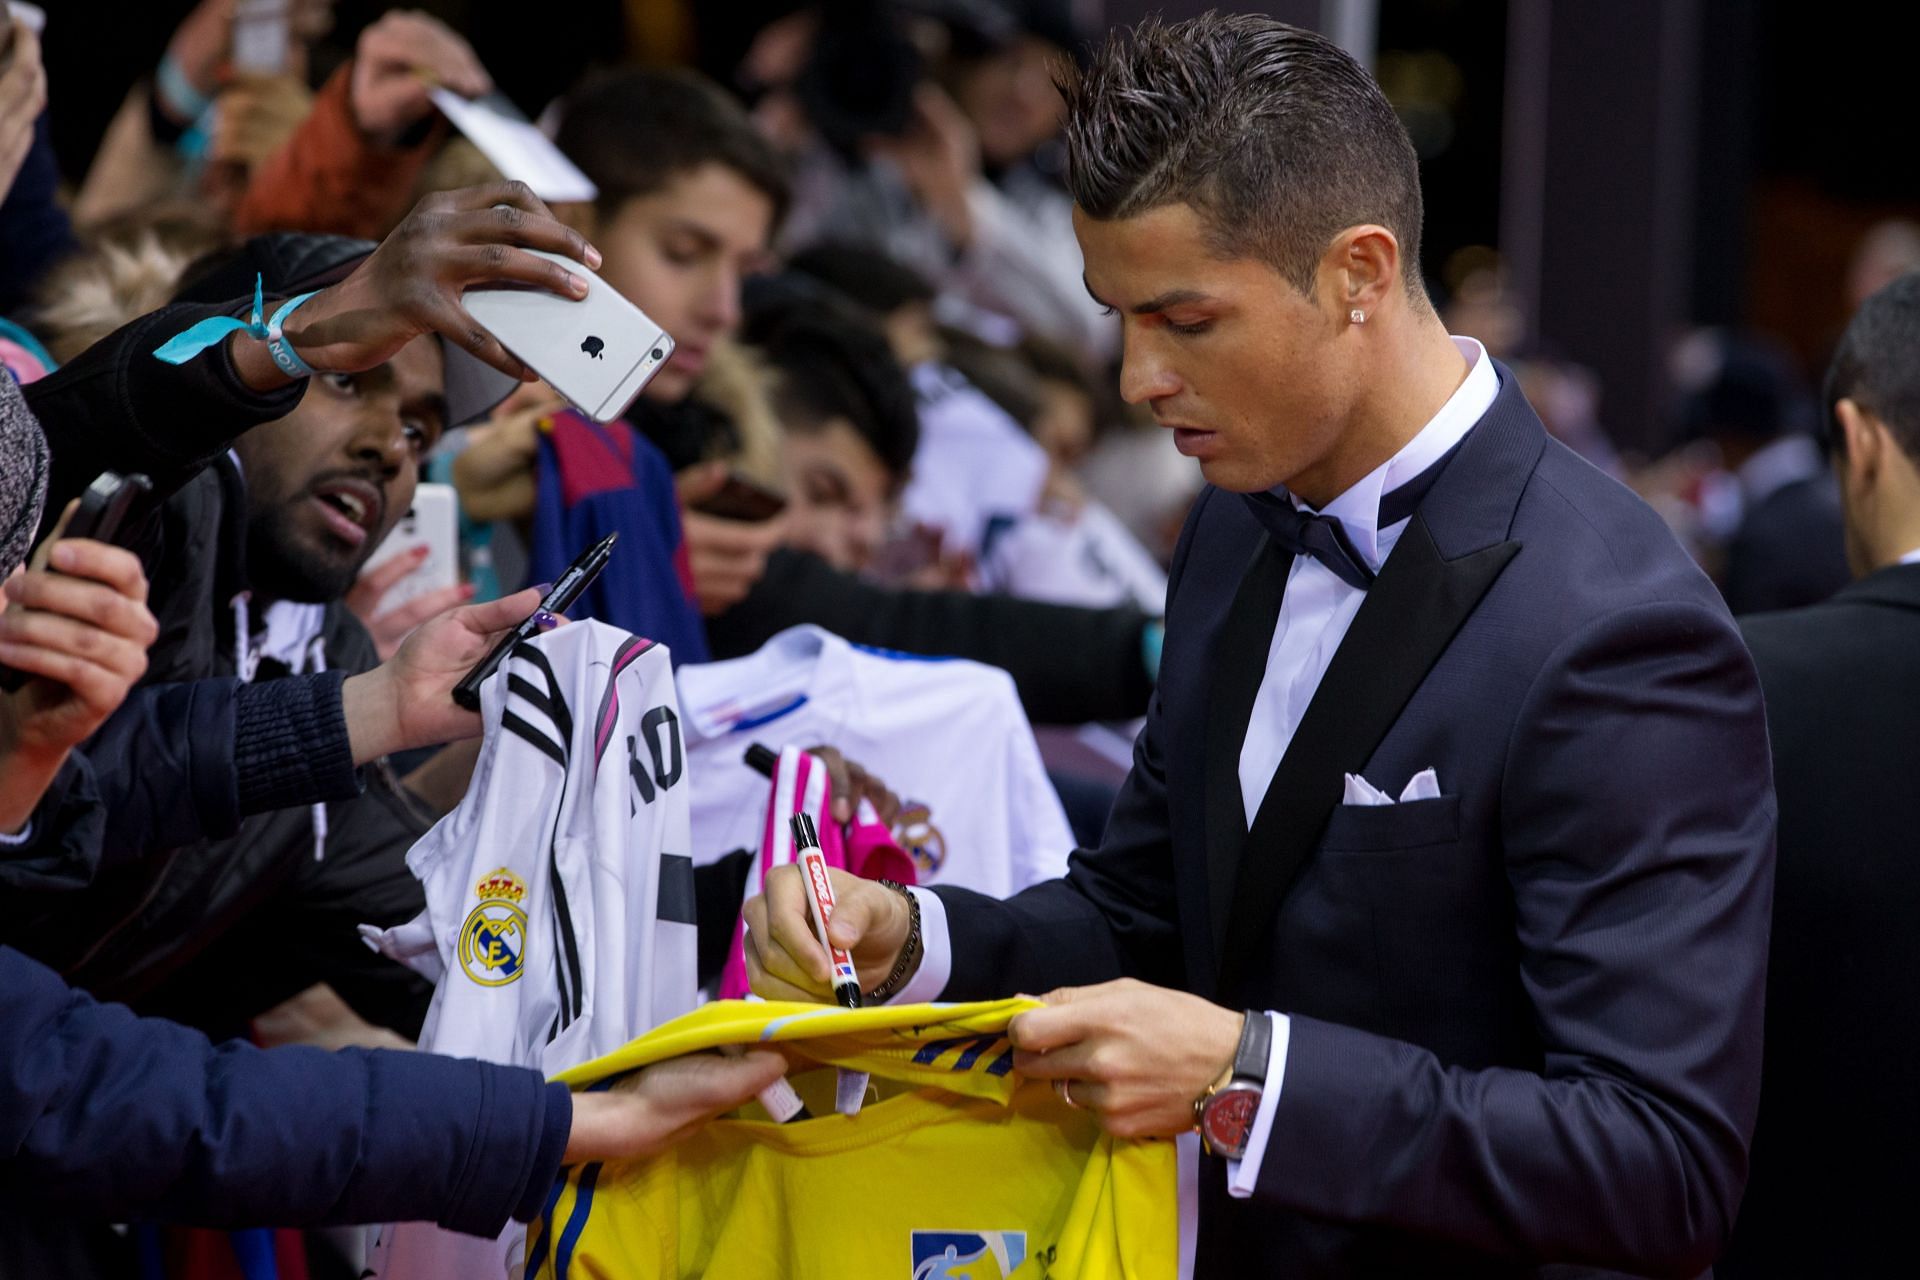 Cristiano Ronaldo owns the most followed Instagram account